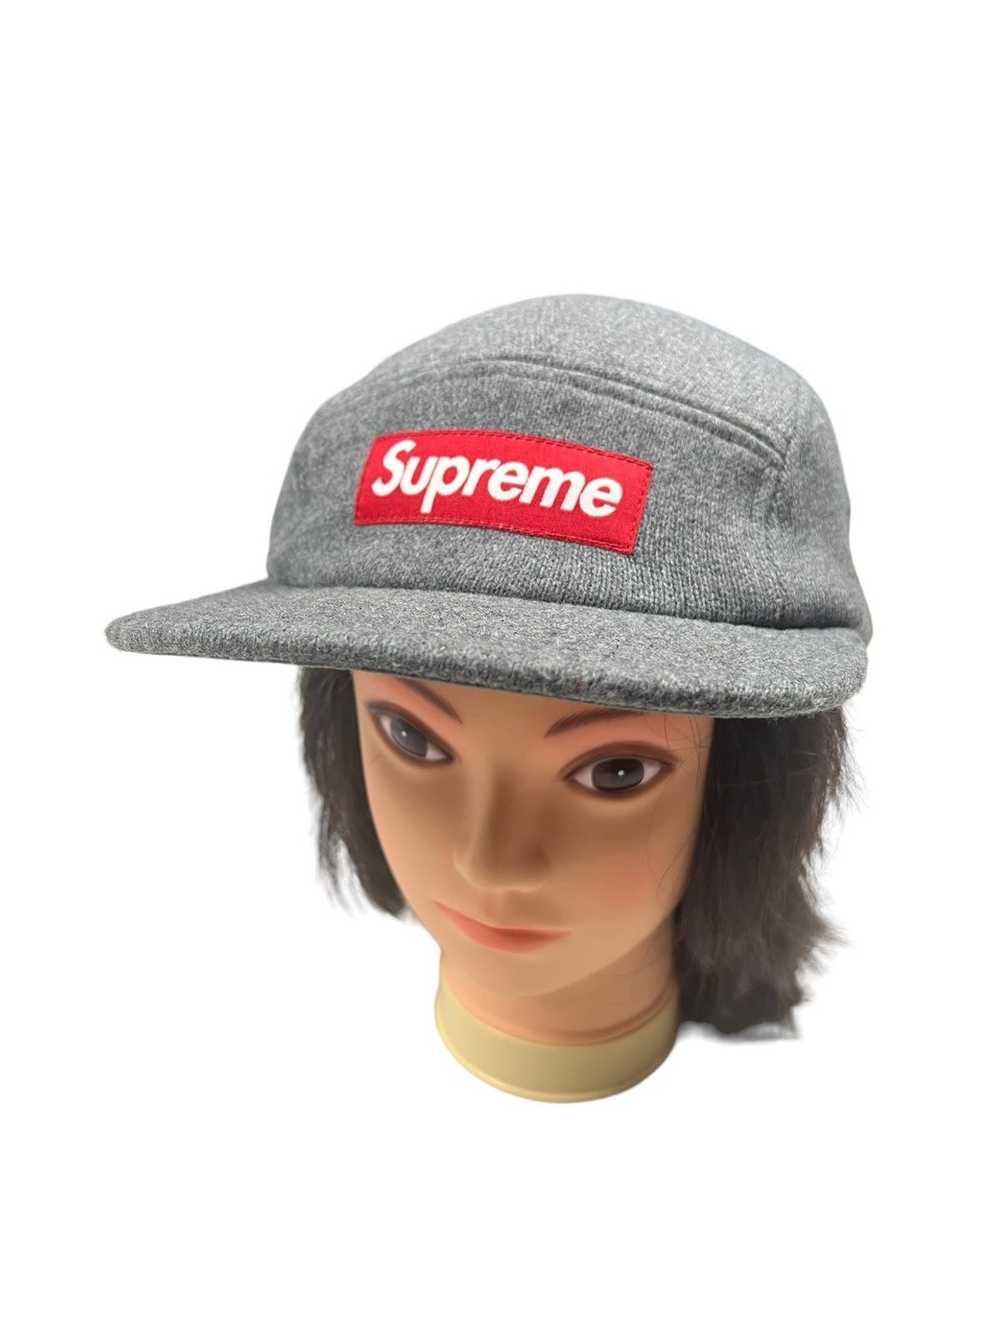 Supreme Supreme Wool Fitted Camp Cap - image 10